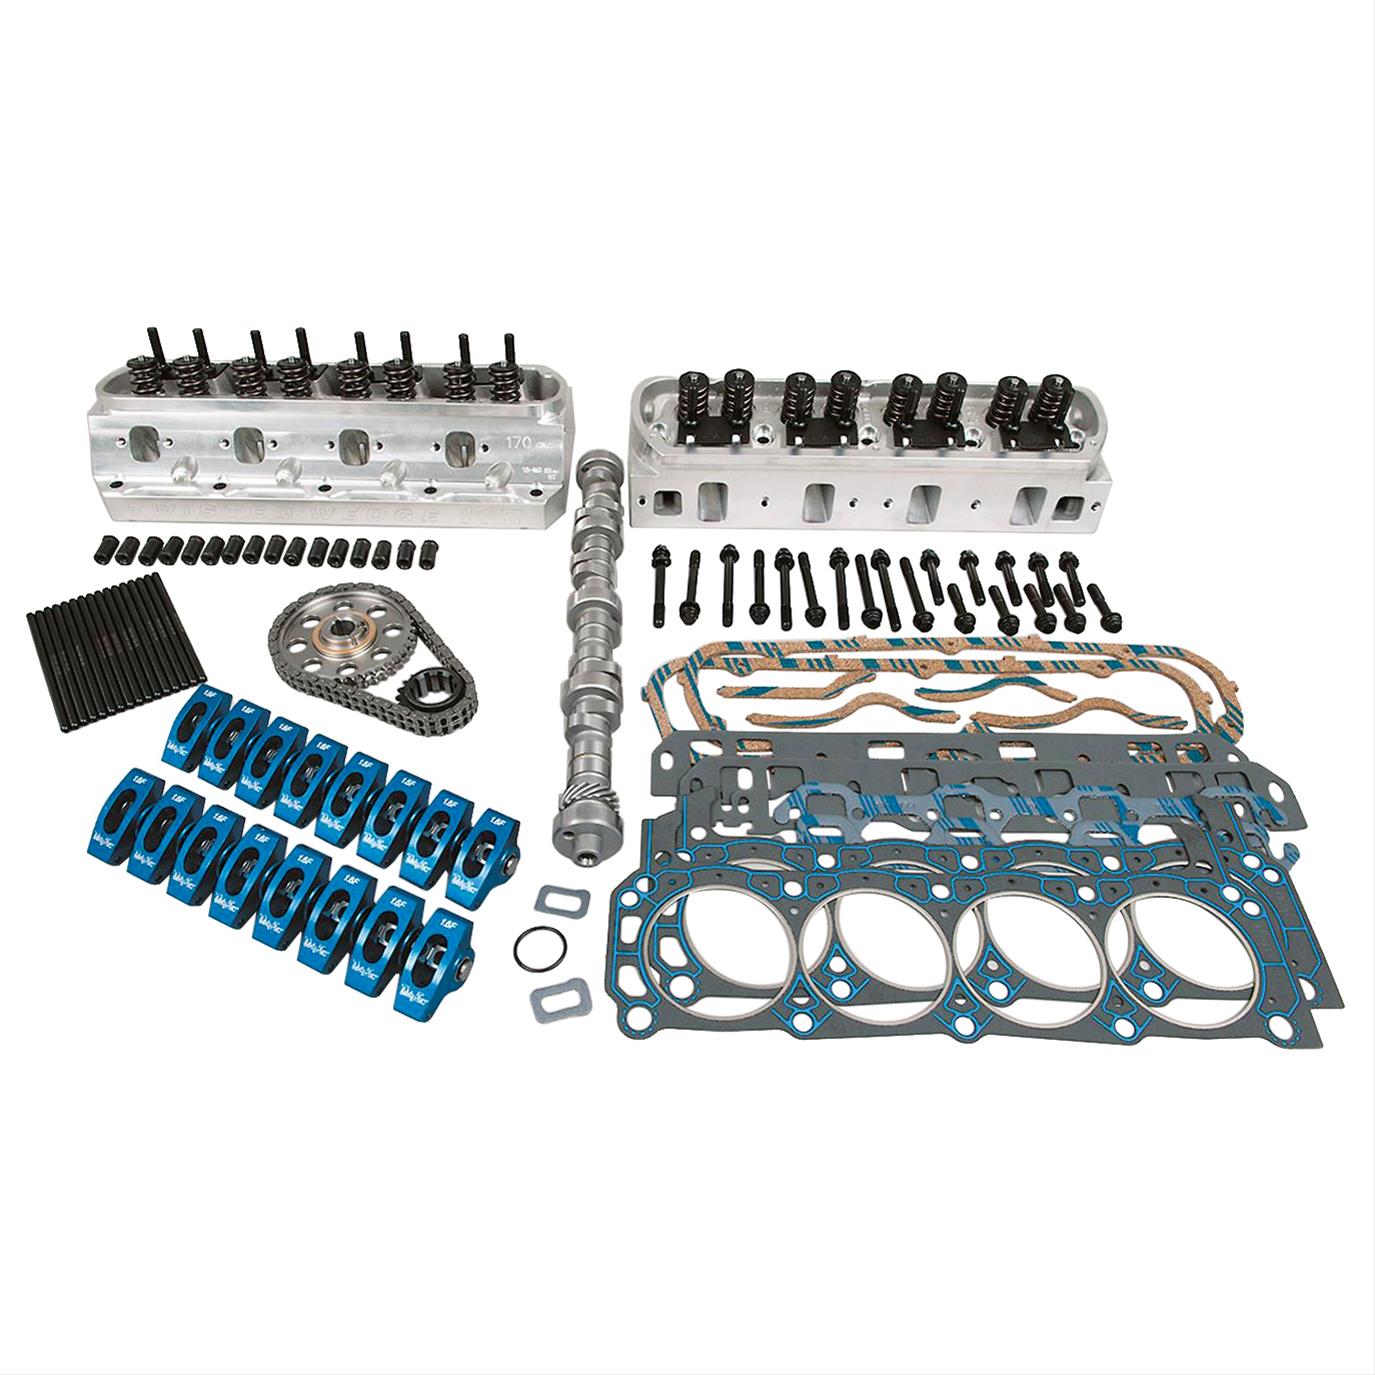 Trick Flow® Twisted Wedge® 11R Top-End Engine Kits for Small 